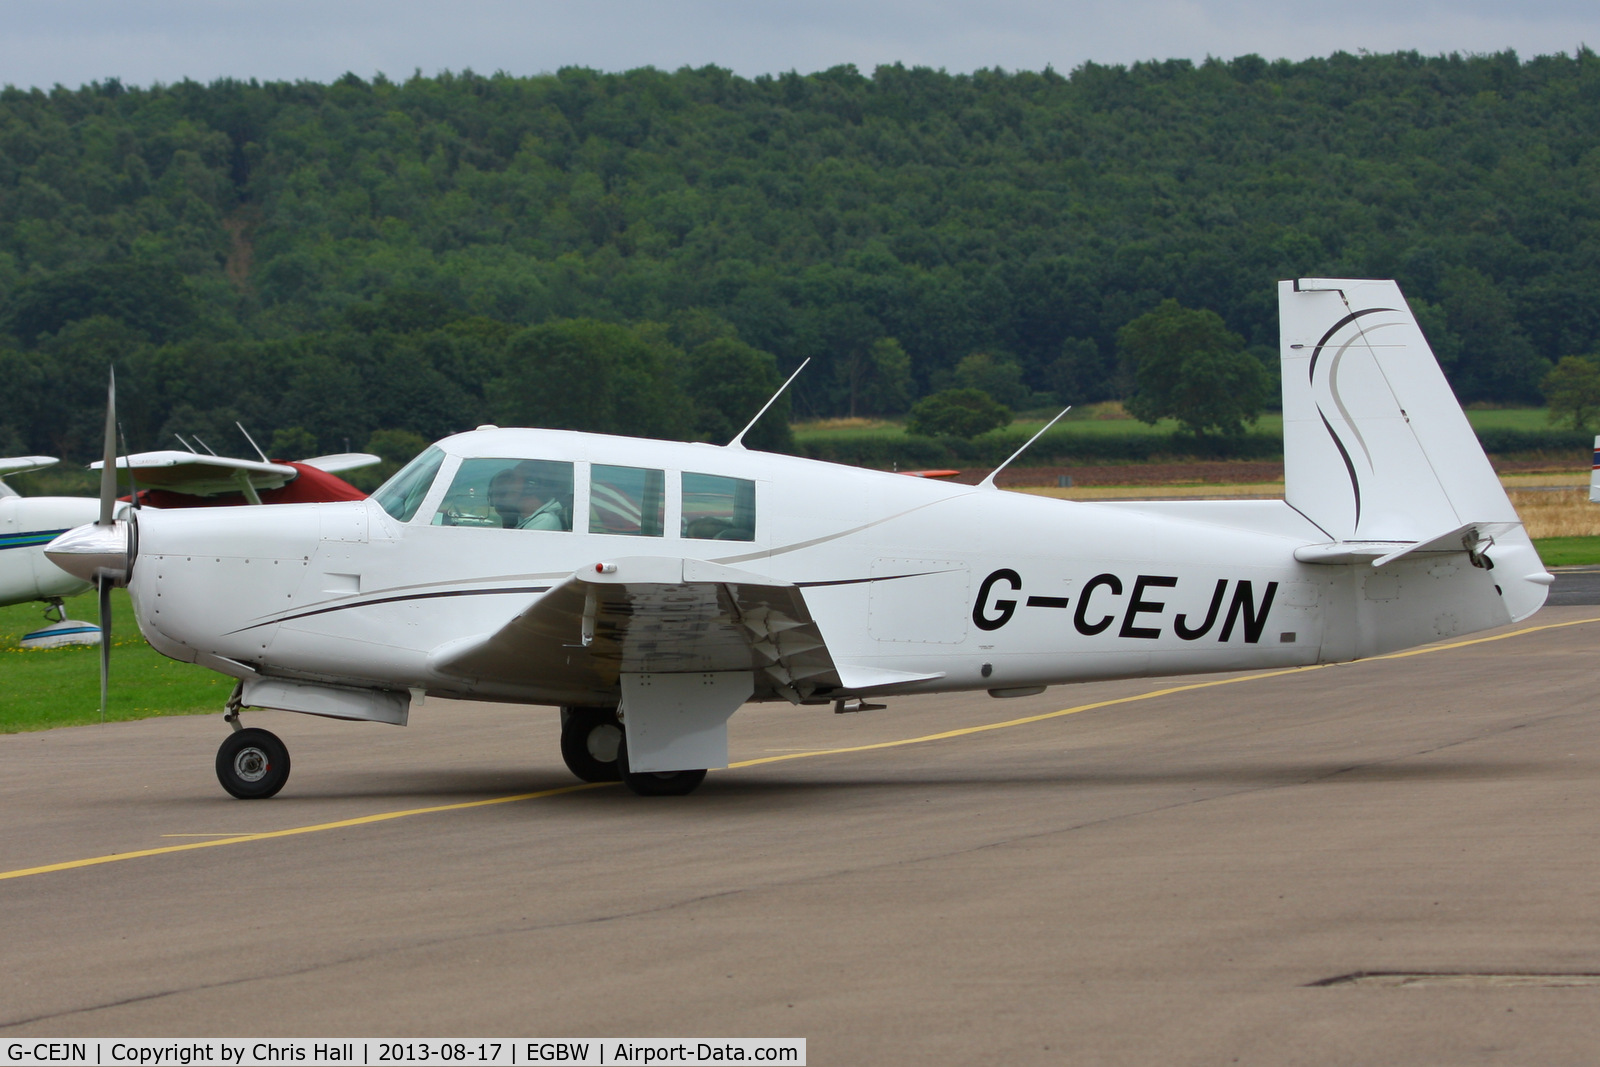 G-CEJN, 1966 Mooney M20F Executive C/N 670216, privately owned